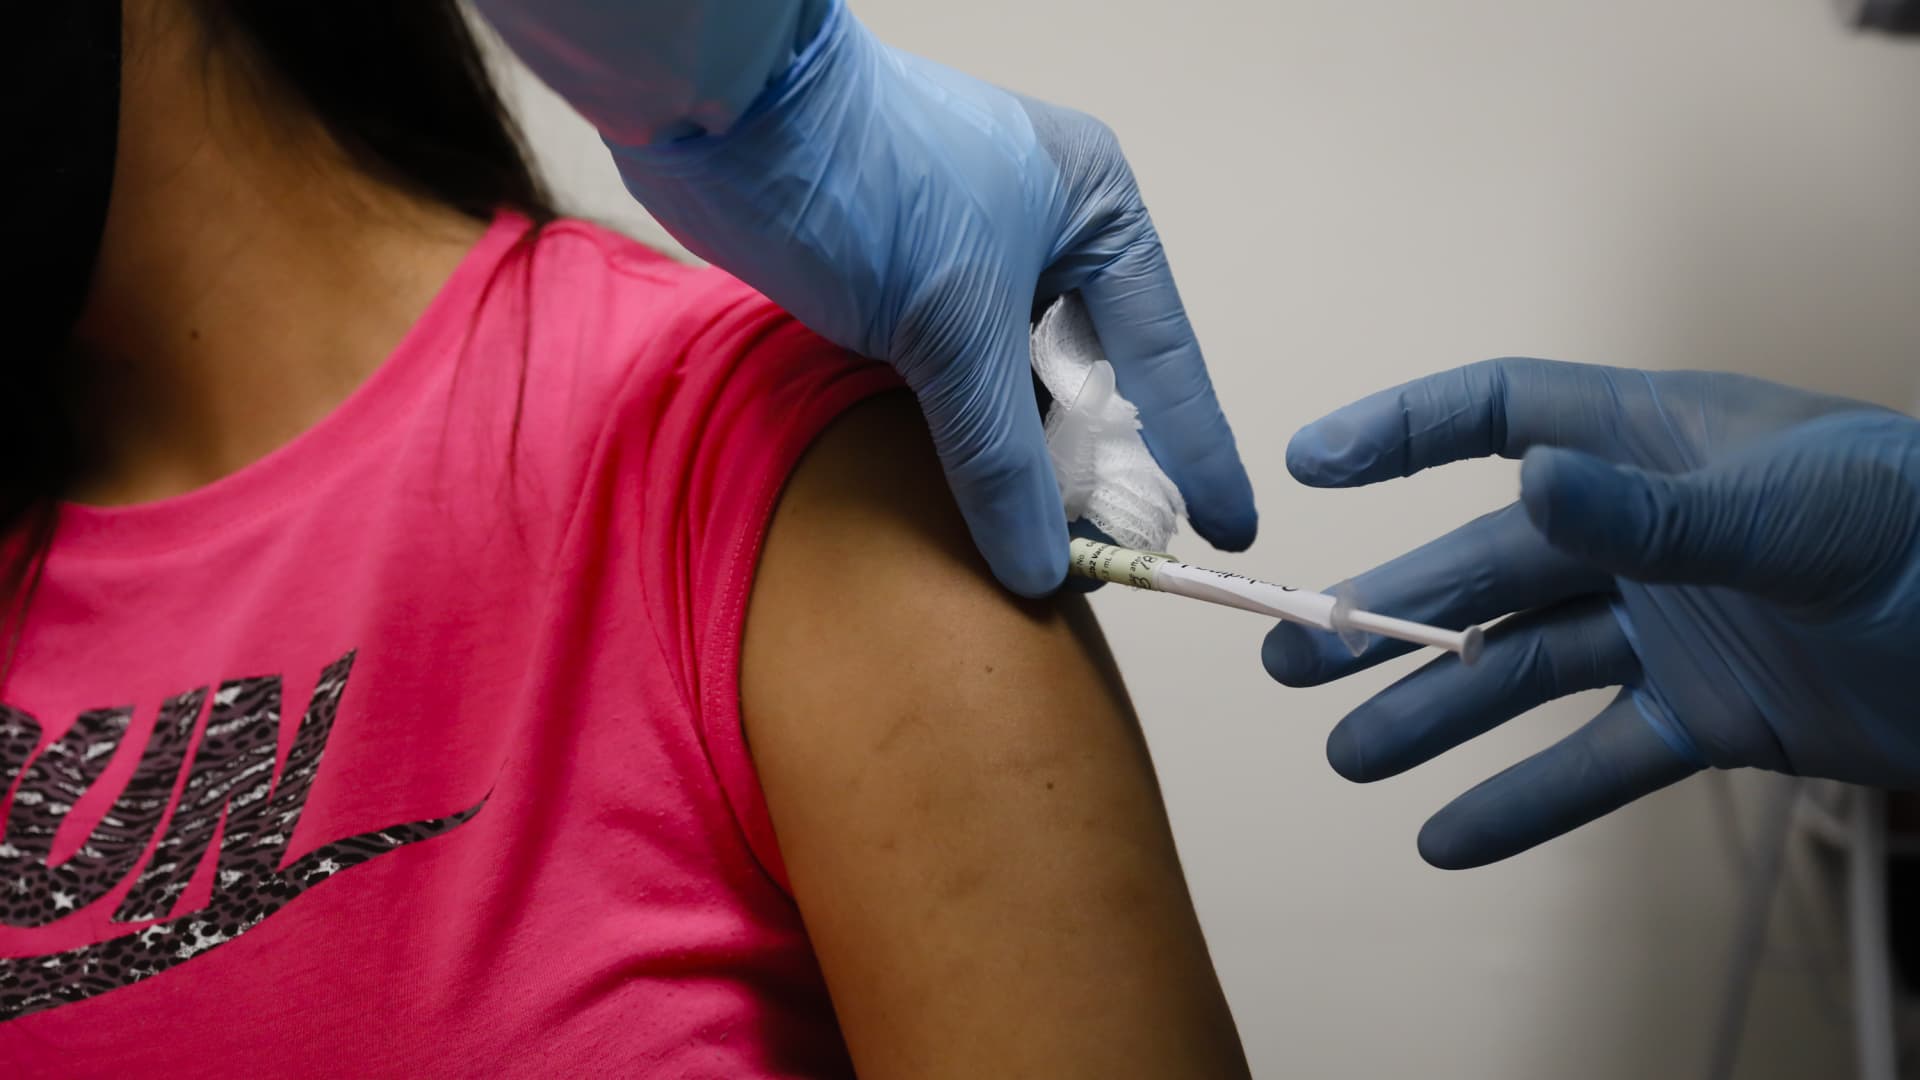 Pfizer coronavirus vaccine could be given to Americans before end of the year, CEO says